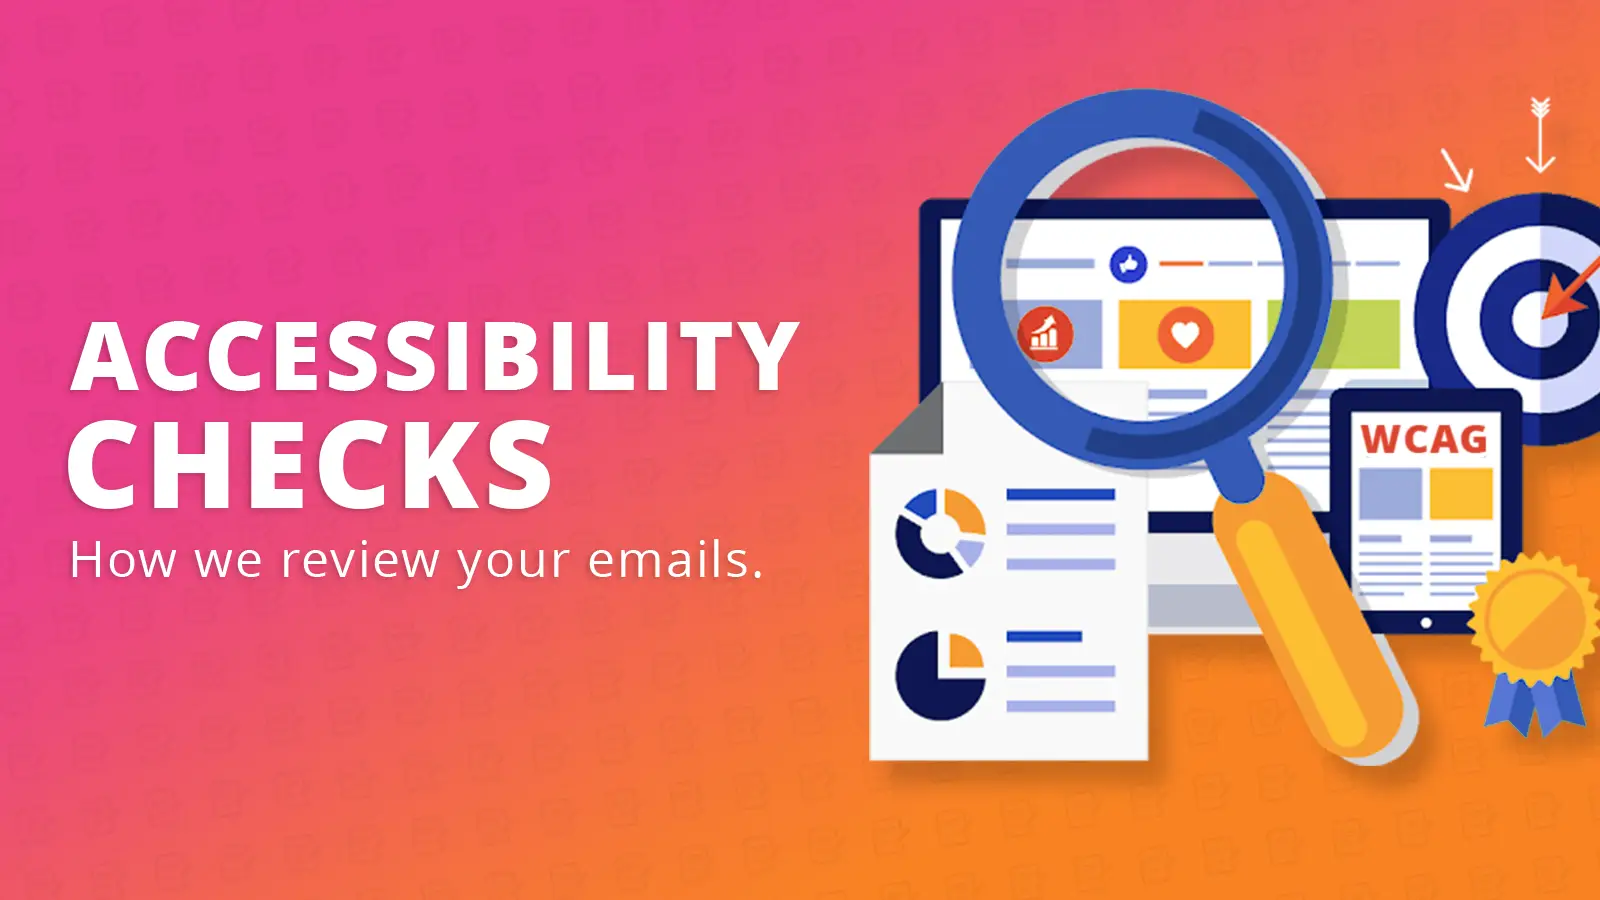 Accessibility checks: How we review you emails